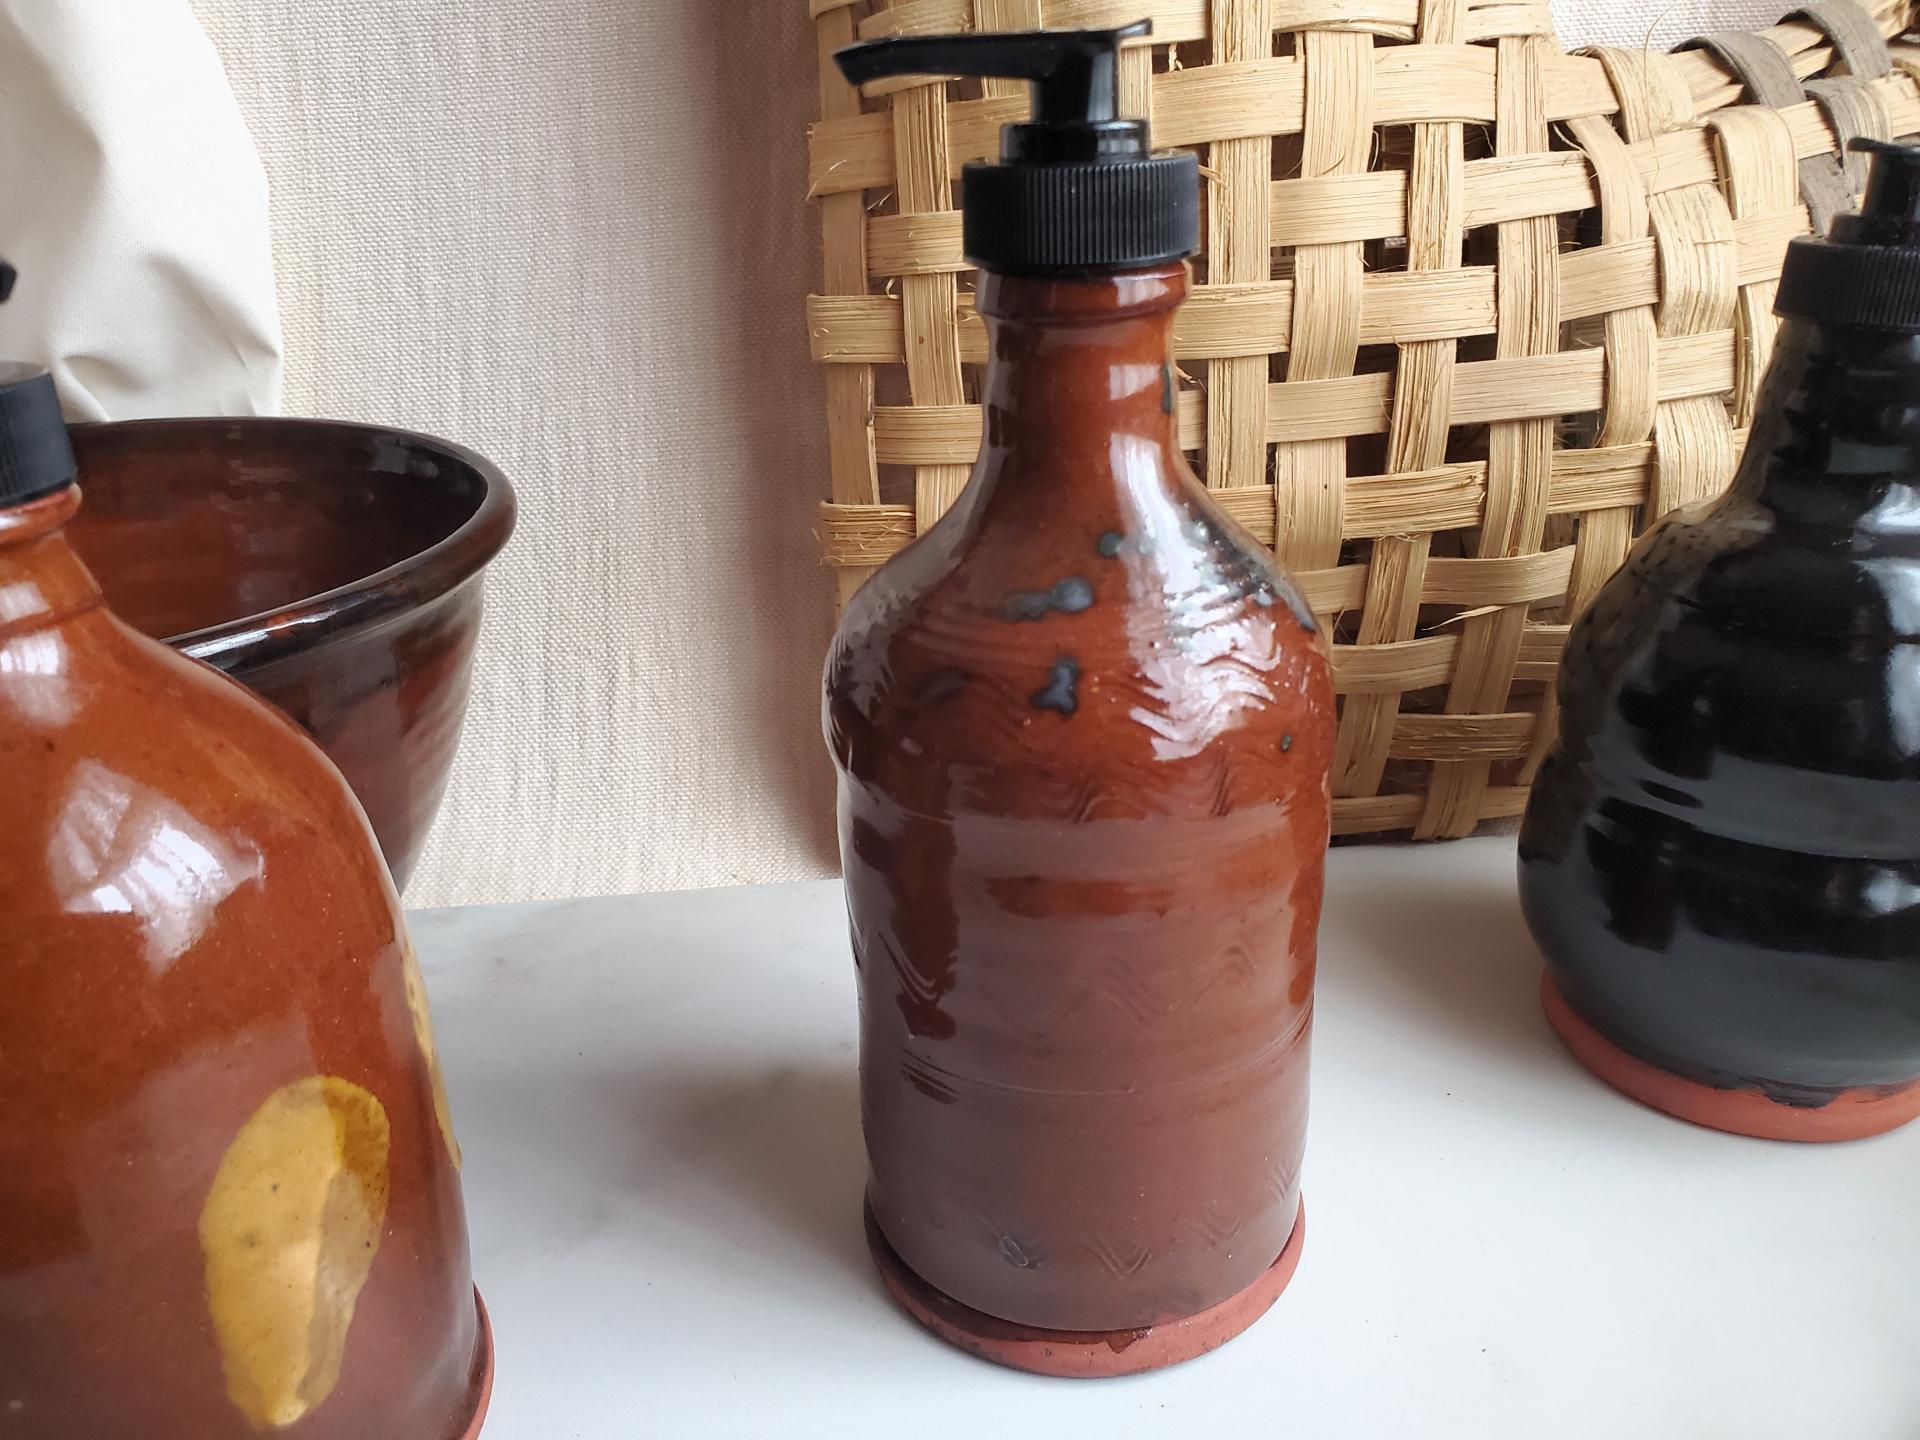 Redware Soap or Lotion Pump Dispenser, Handmade by Rick of Pied Potter Hamelin, Featuring Spangles